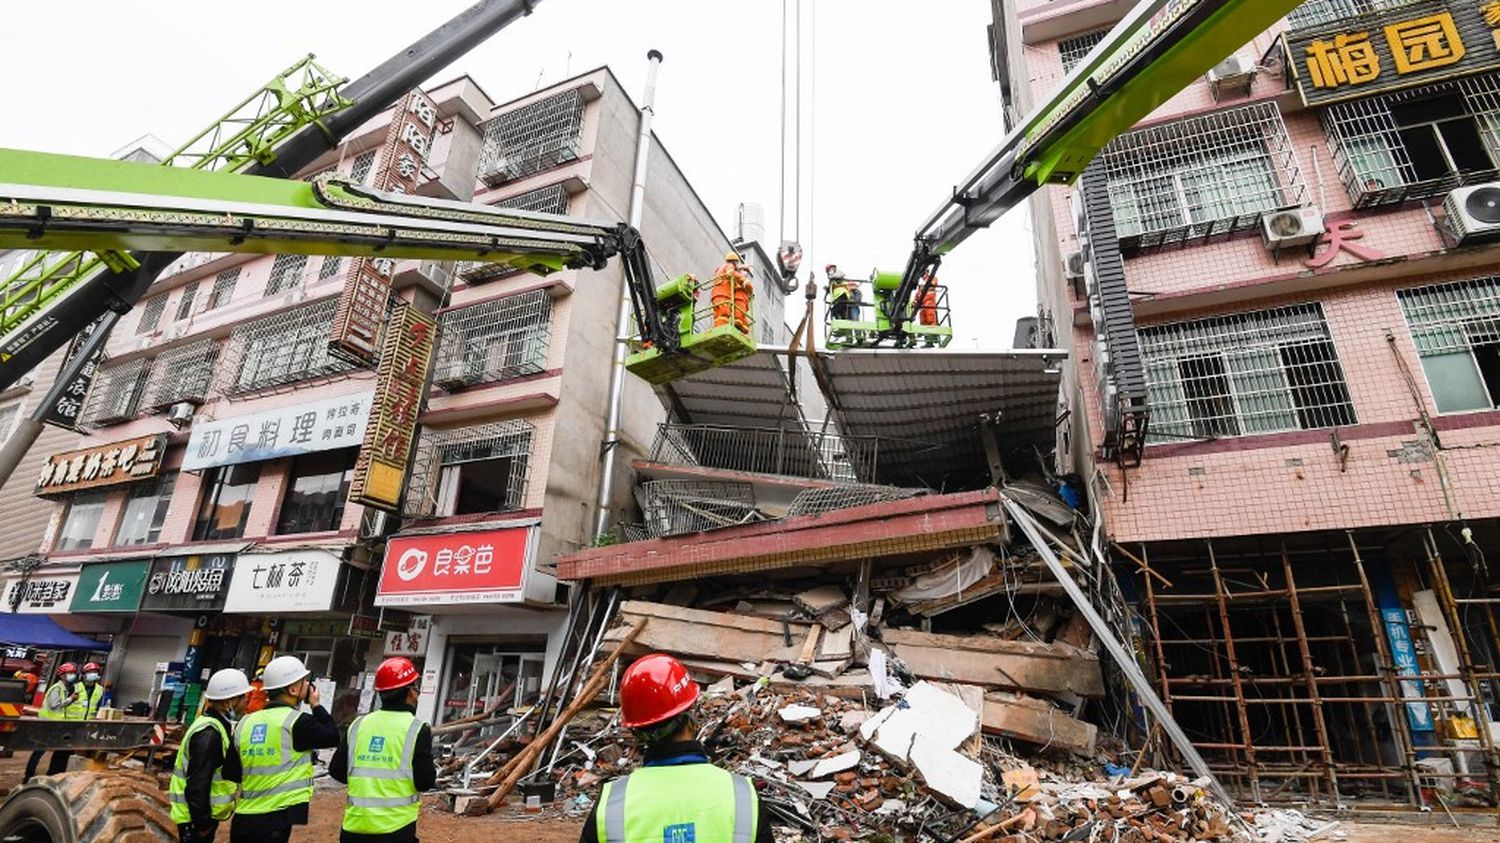 Building collapse kills 53 in central China's Changsha
